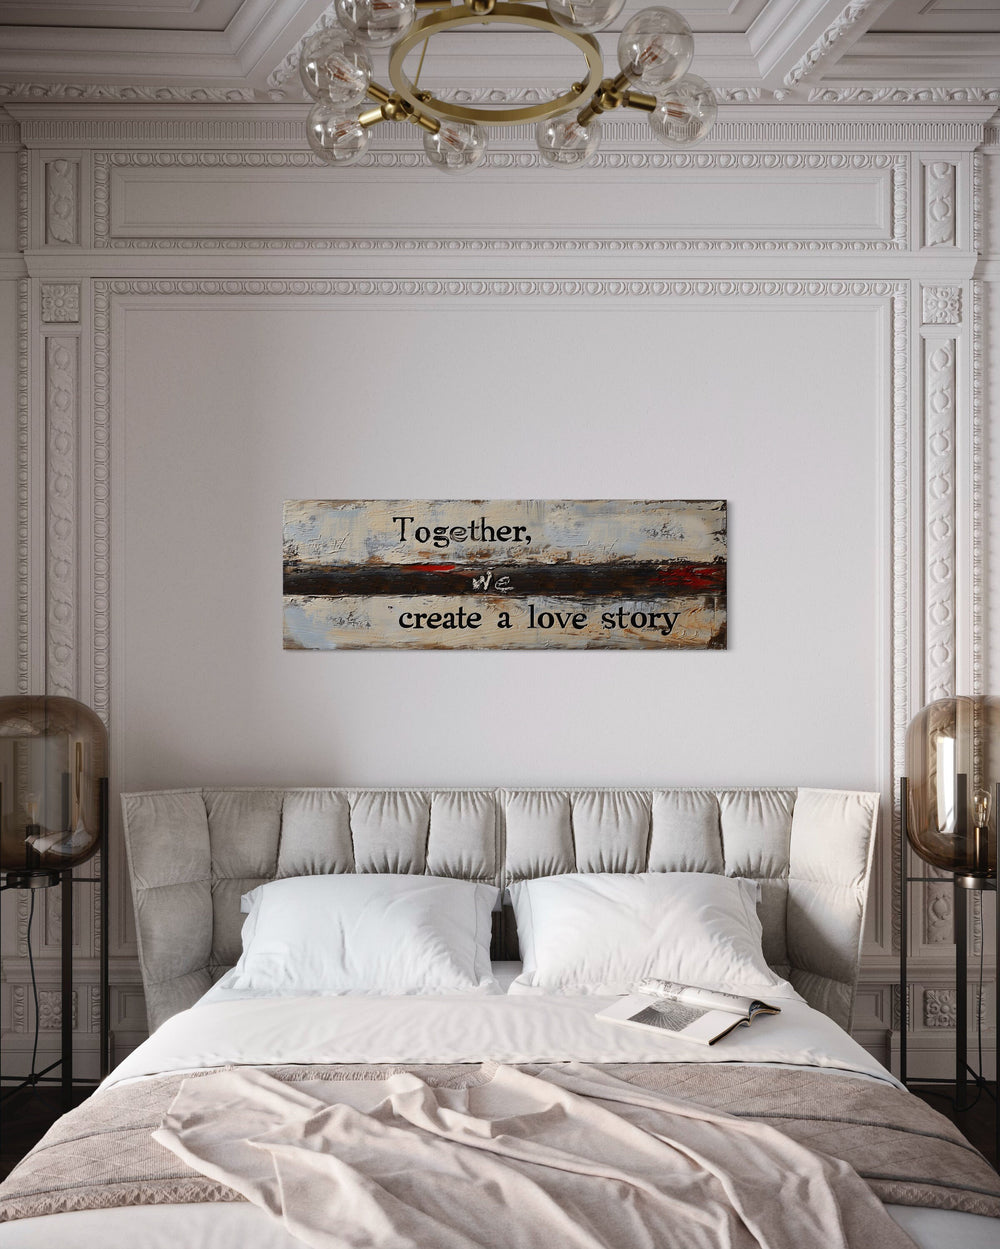 Over Bed Romantic Rustic Bedroom Framed Canvas Wall Art